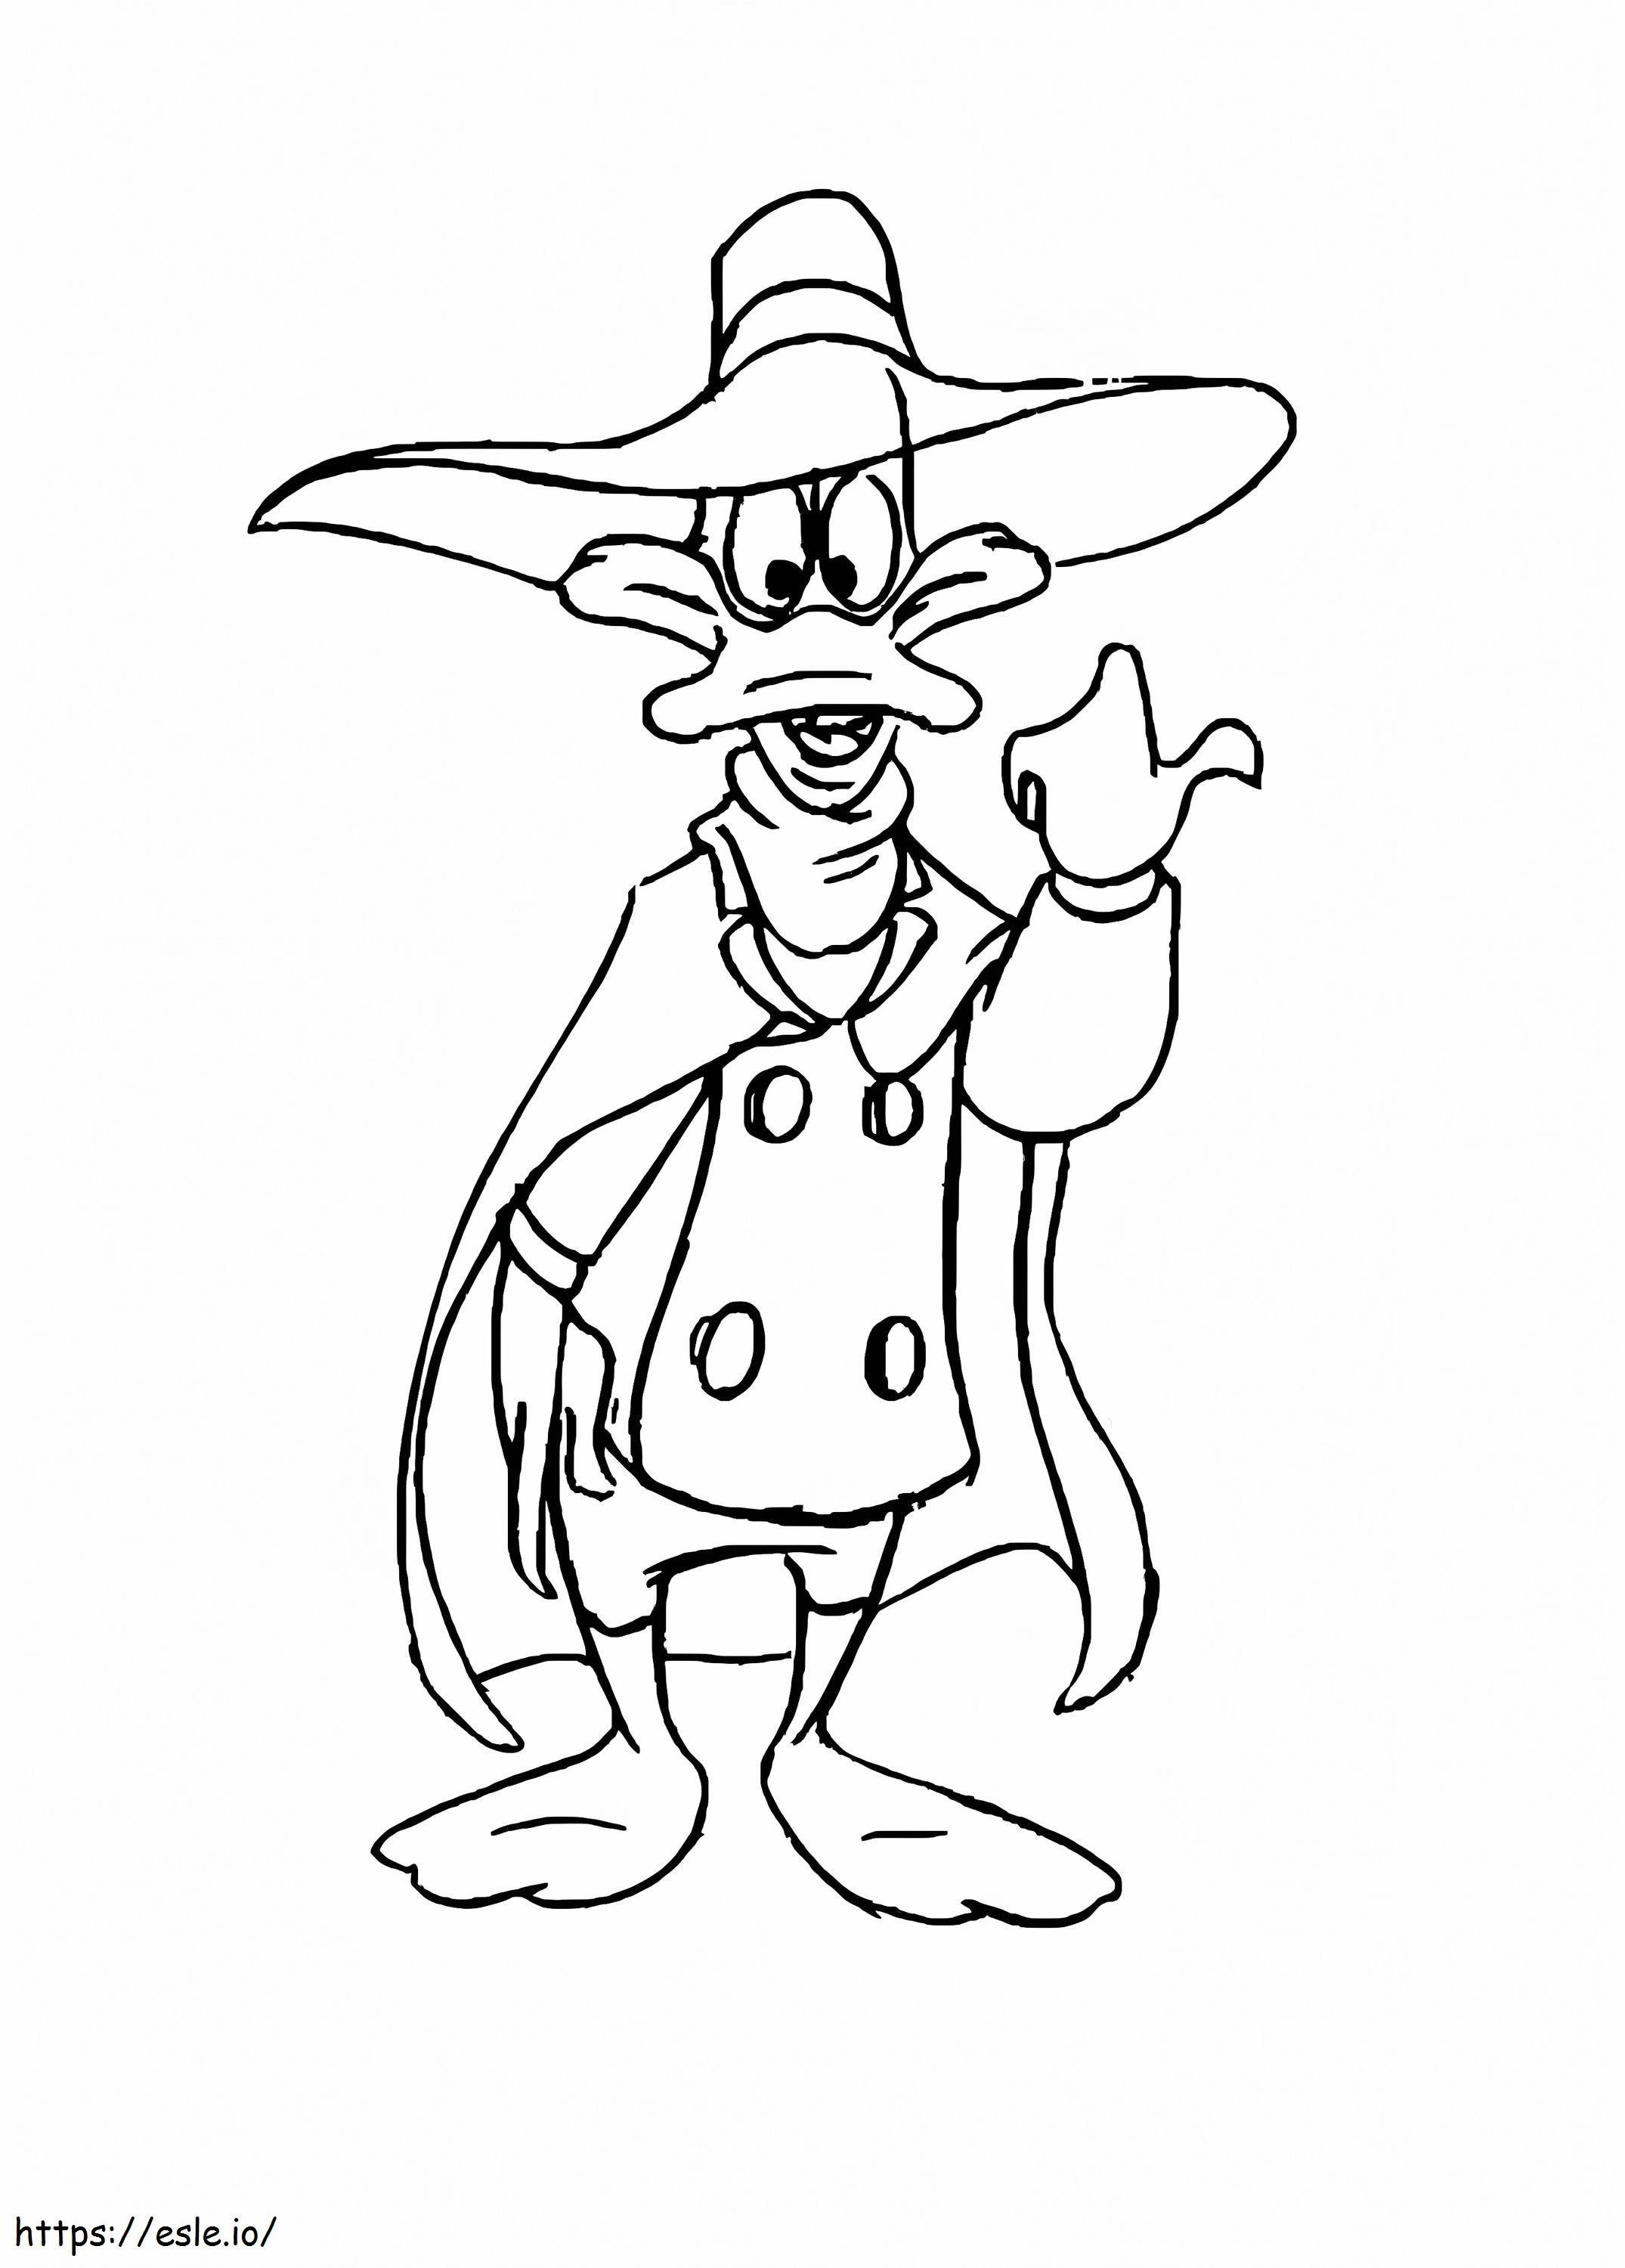 Funny Darkwing Duck coloring page